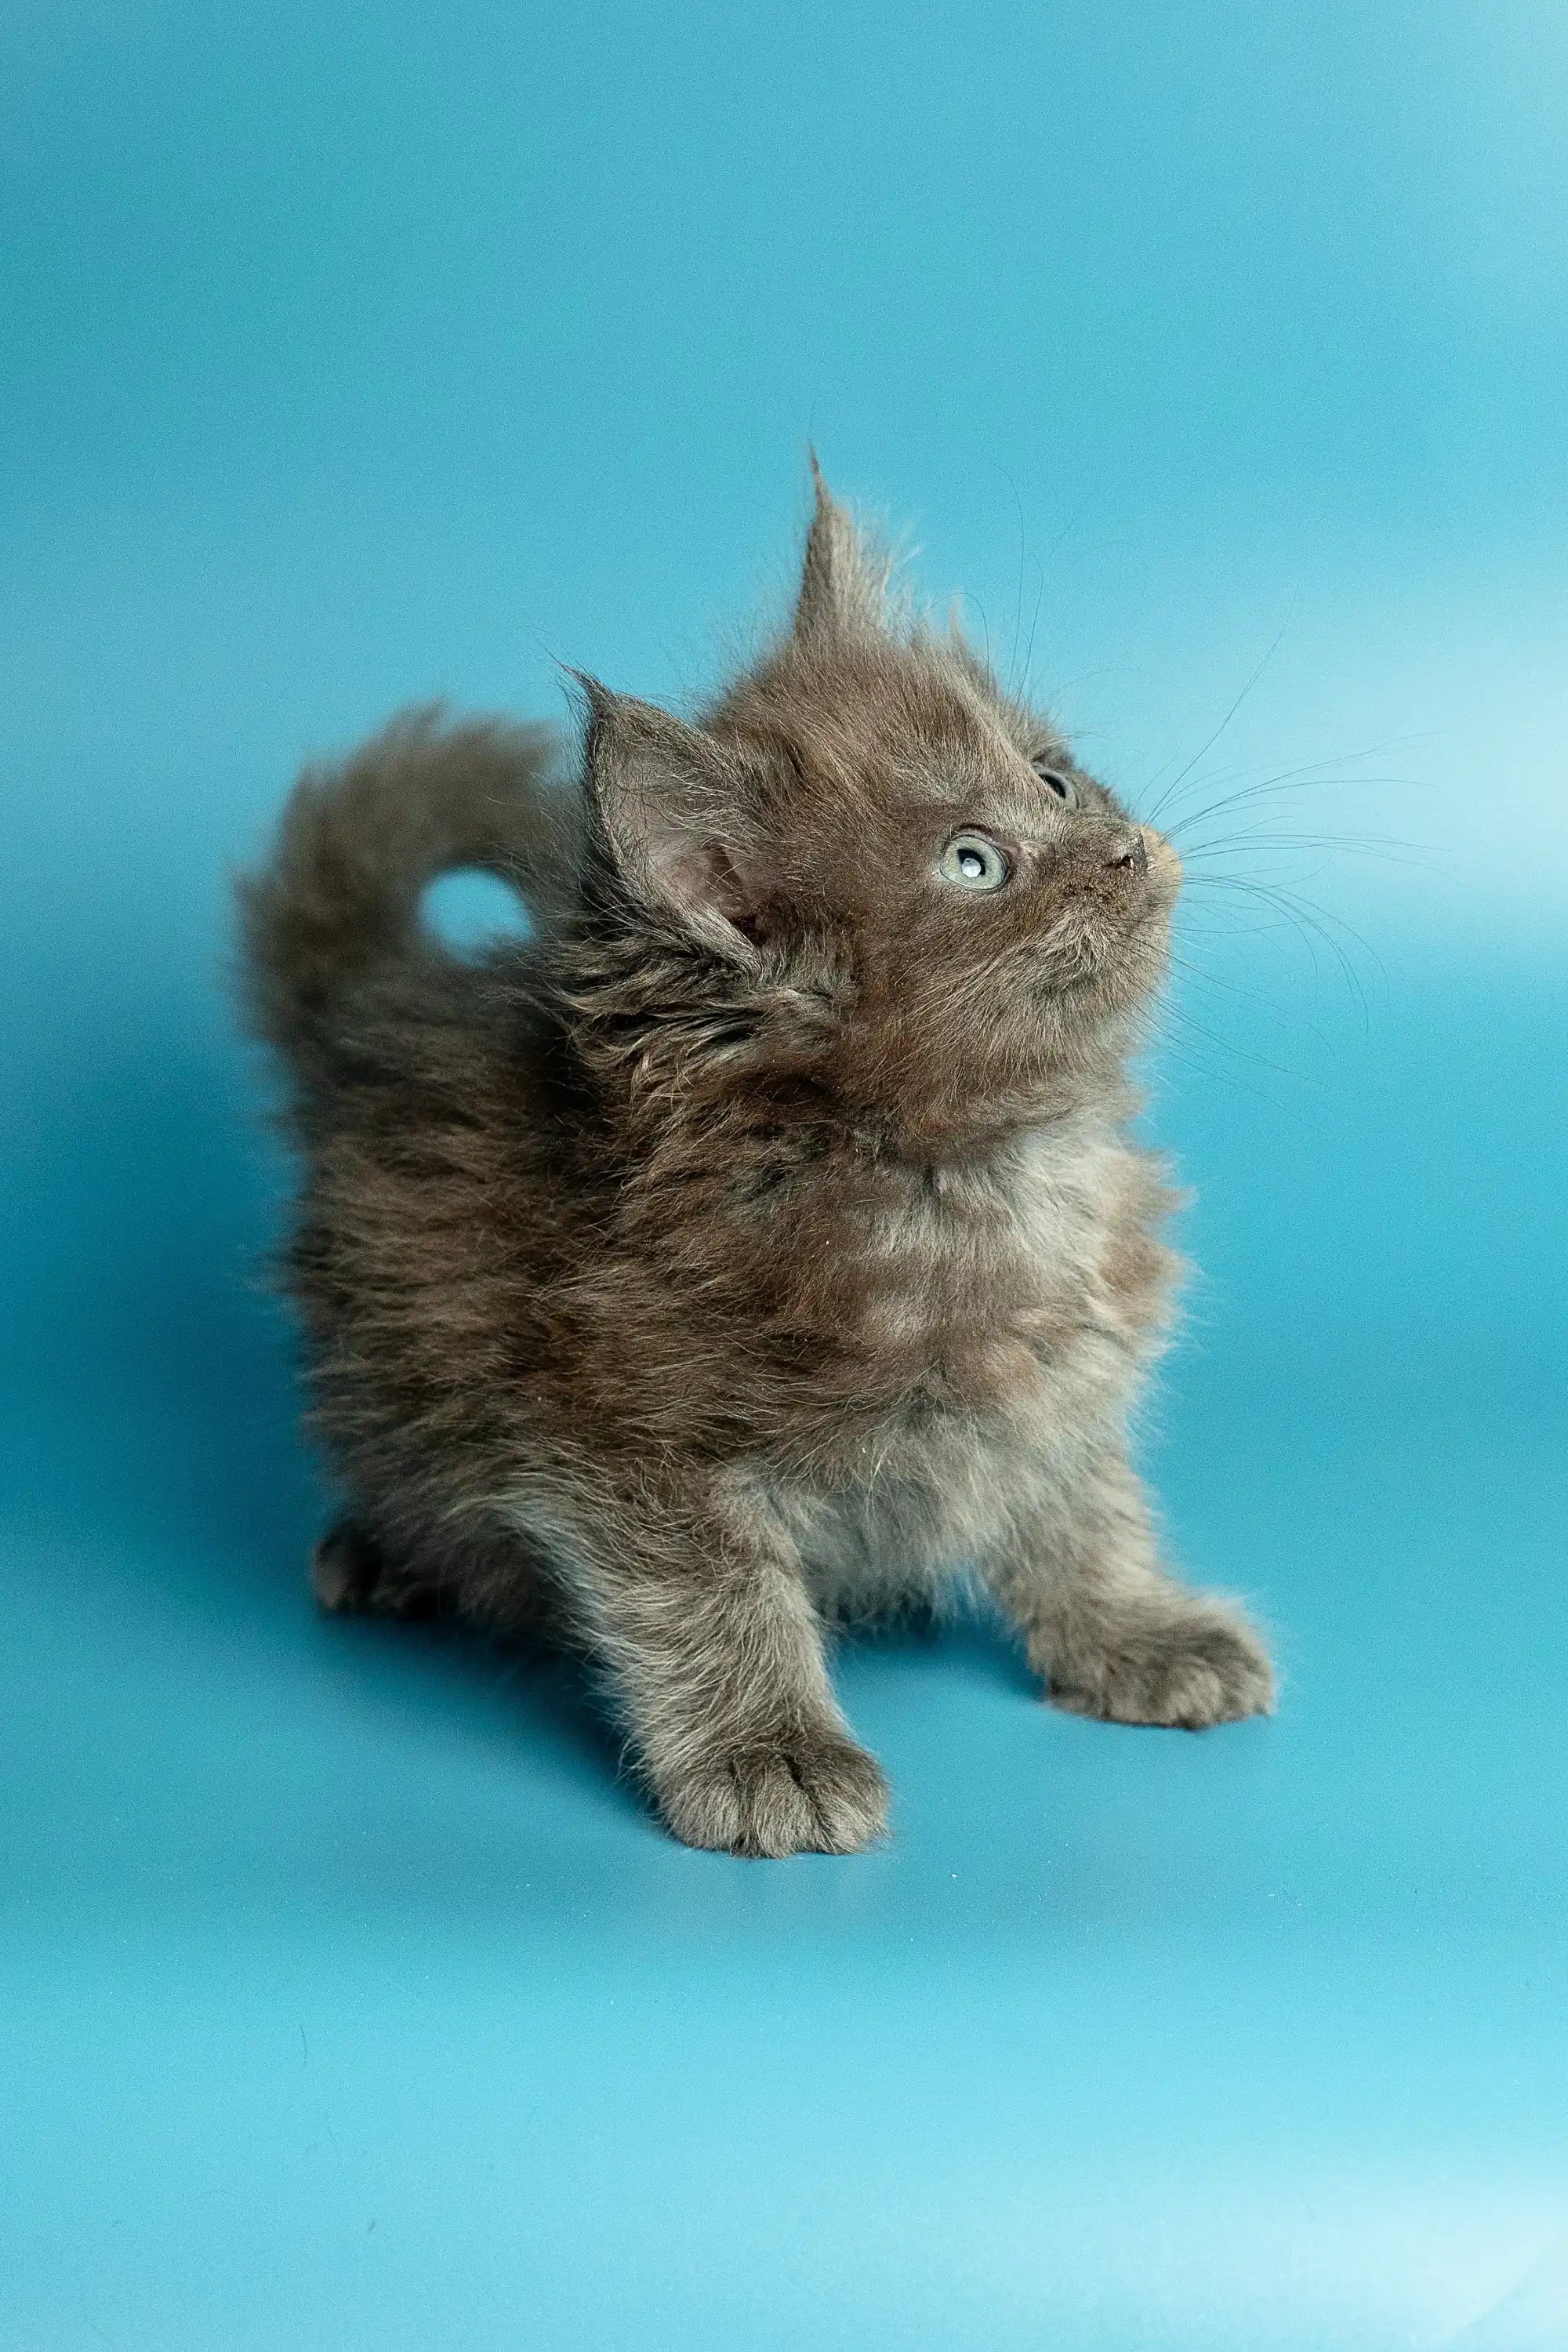 Maine Coon Kittens for Sale May | Kitten